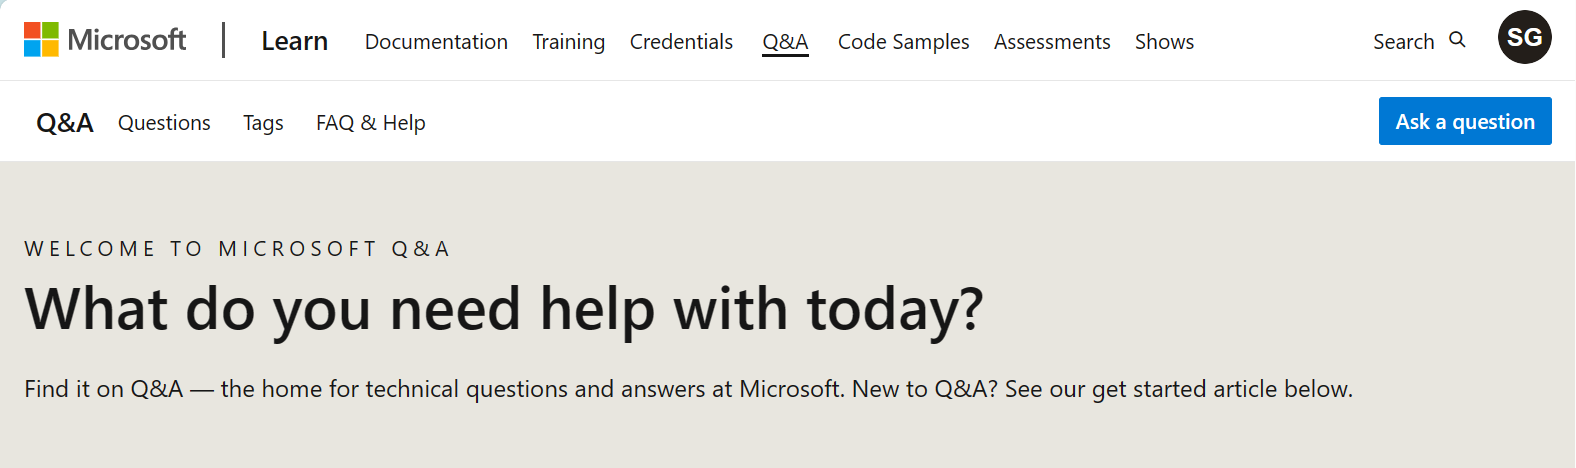 Screenshot of the home page of Microsoft Q&A.